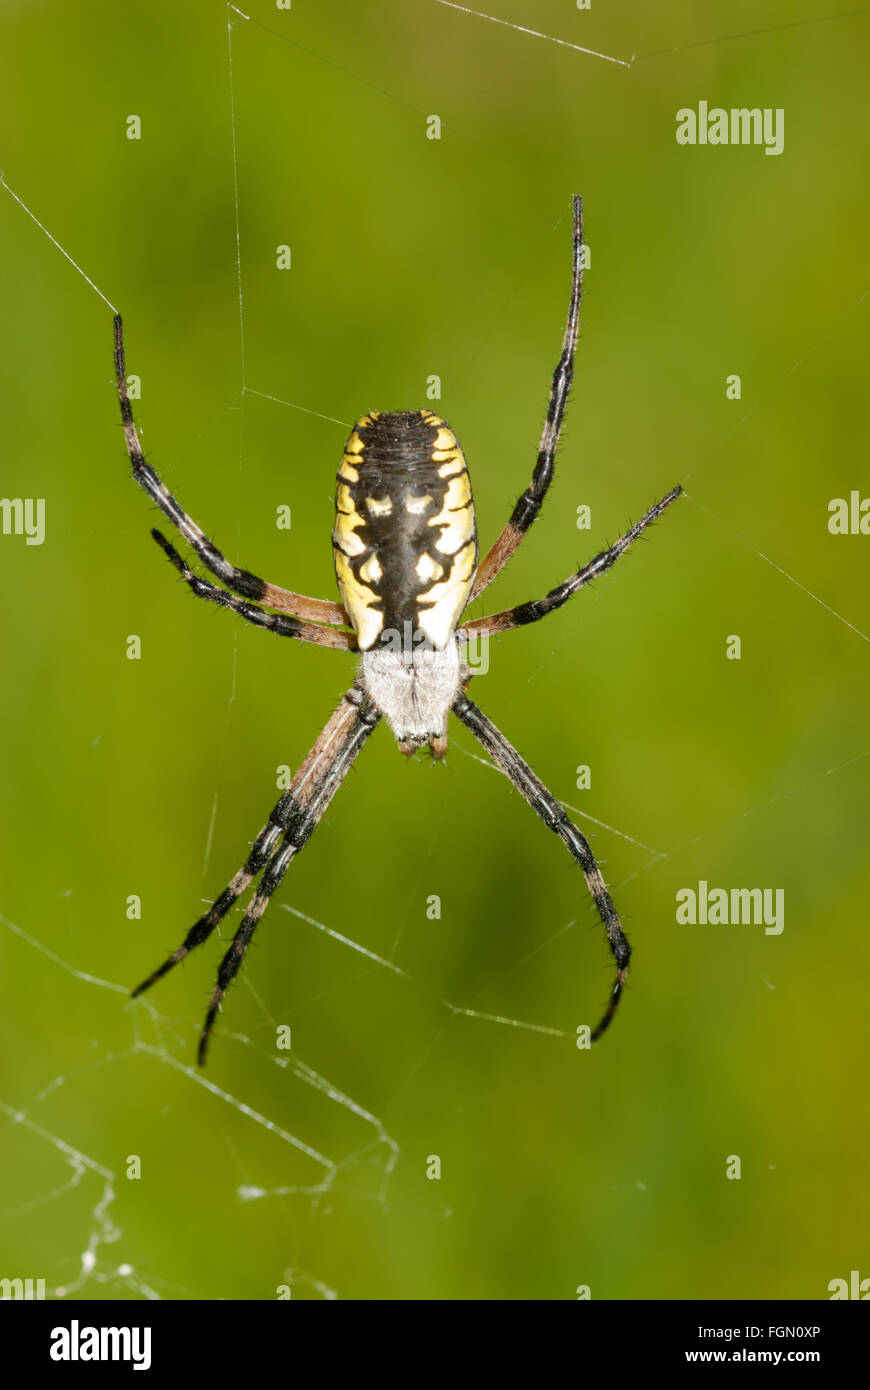 A yellow and black argiope spider sitting on its web in the Parrots Bay Conservation Area, Ontario, Canada Stock Photo